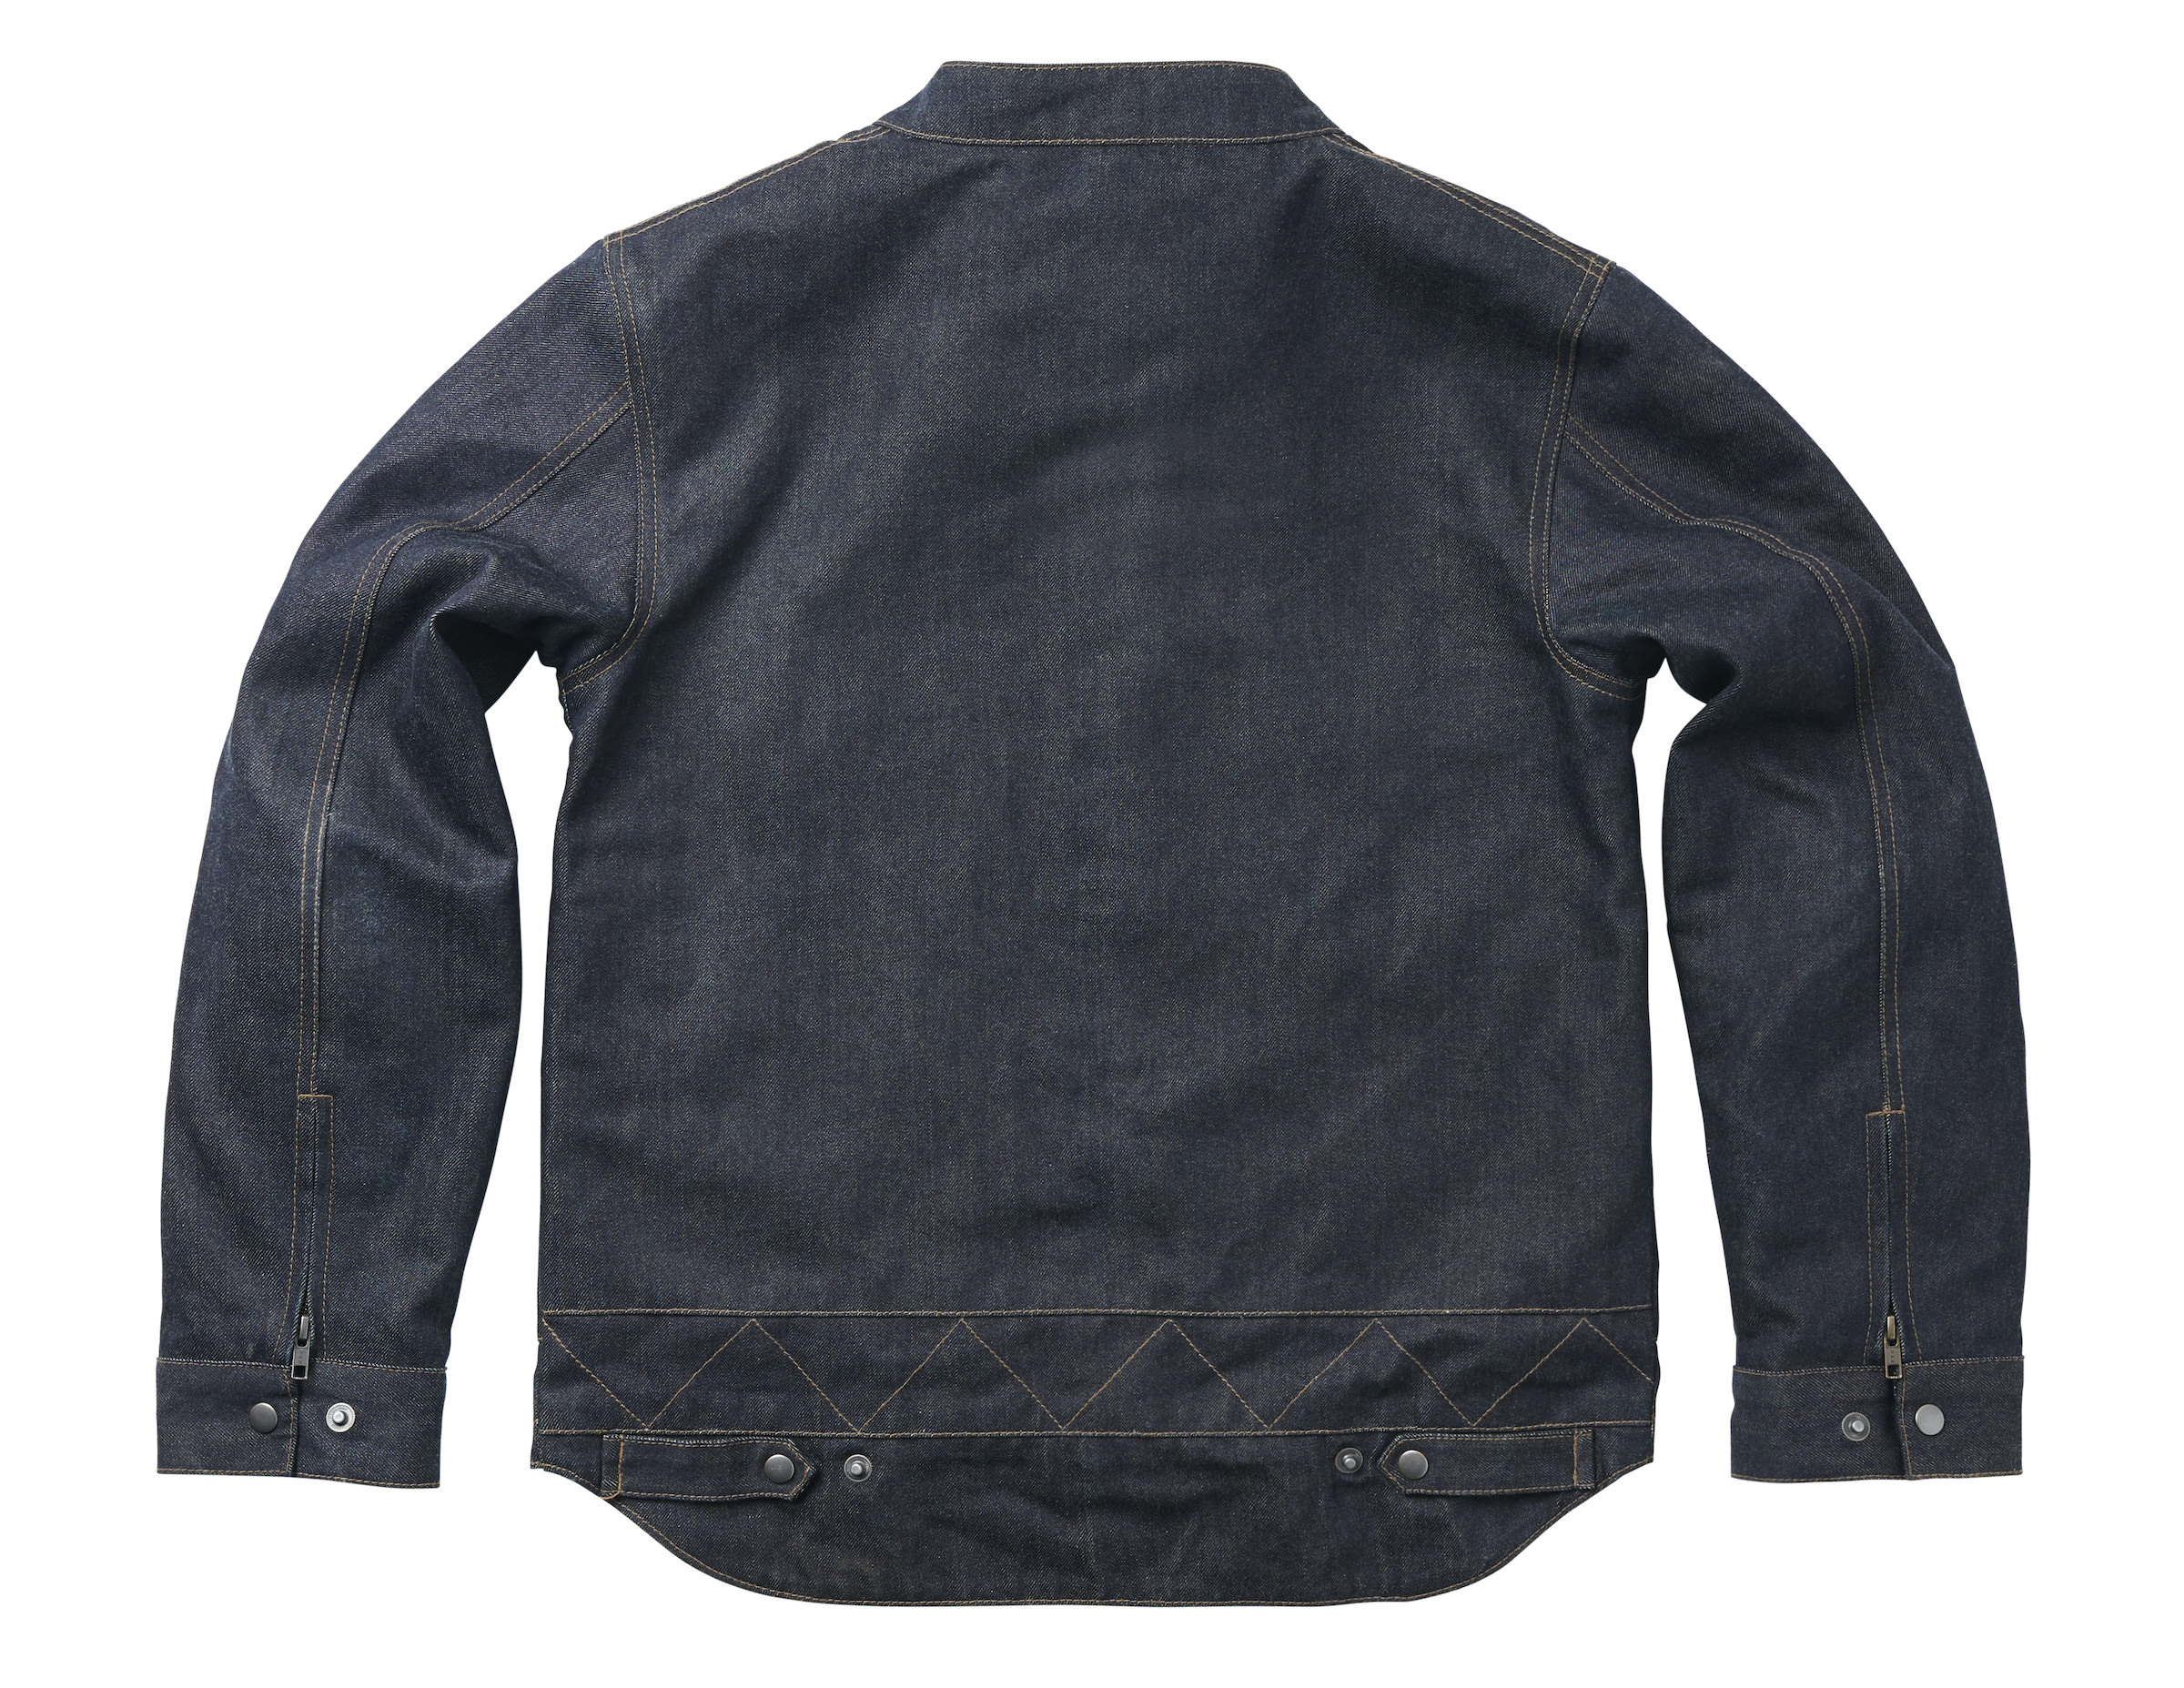 The New Fuel Greasy Jacket - An Armored Aramid + Denim Motorcycle Jacket